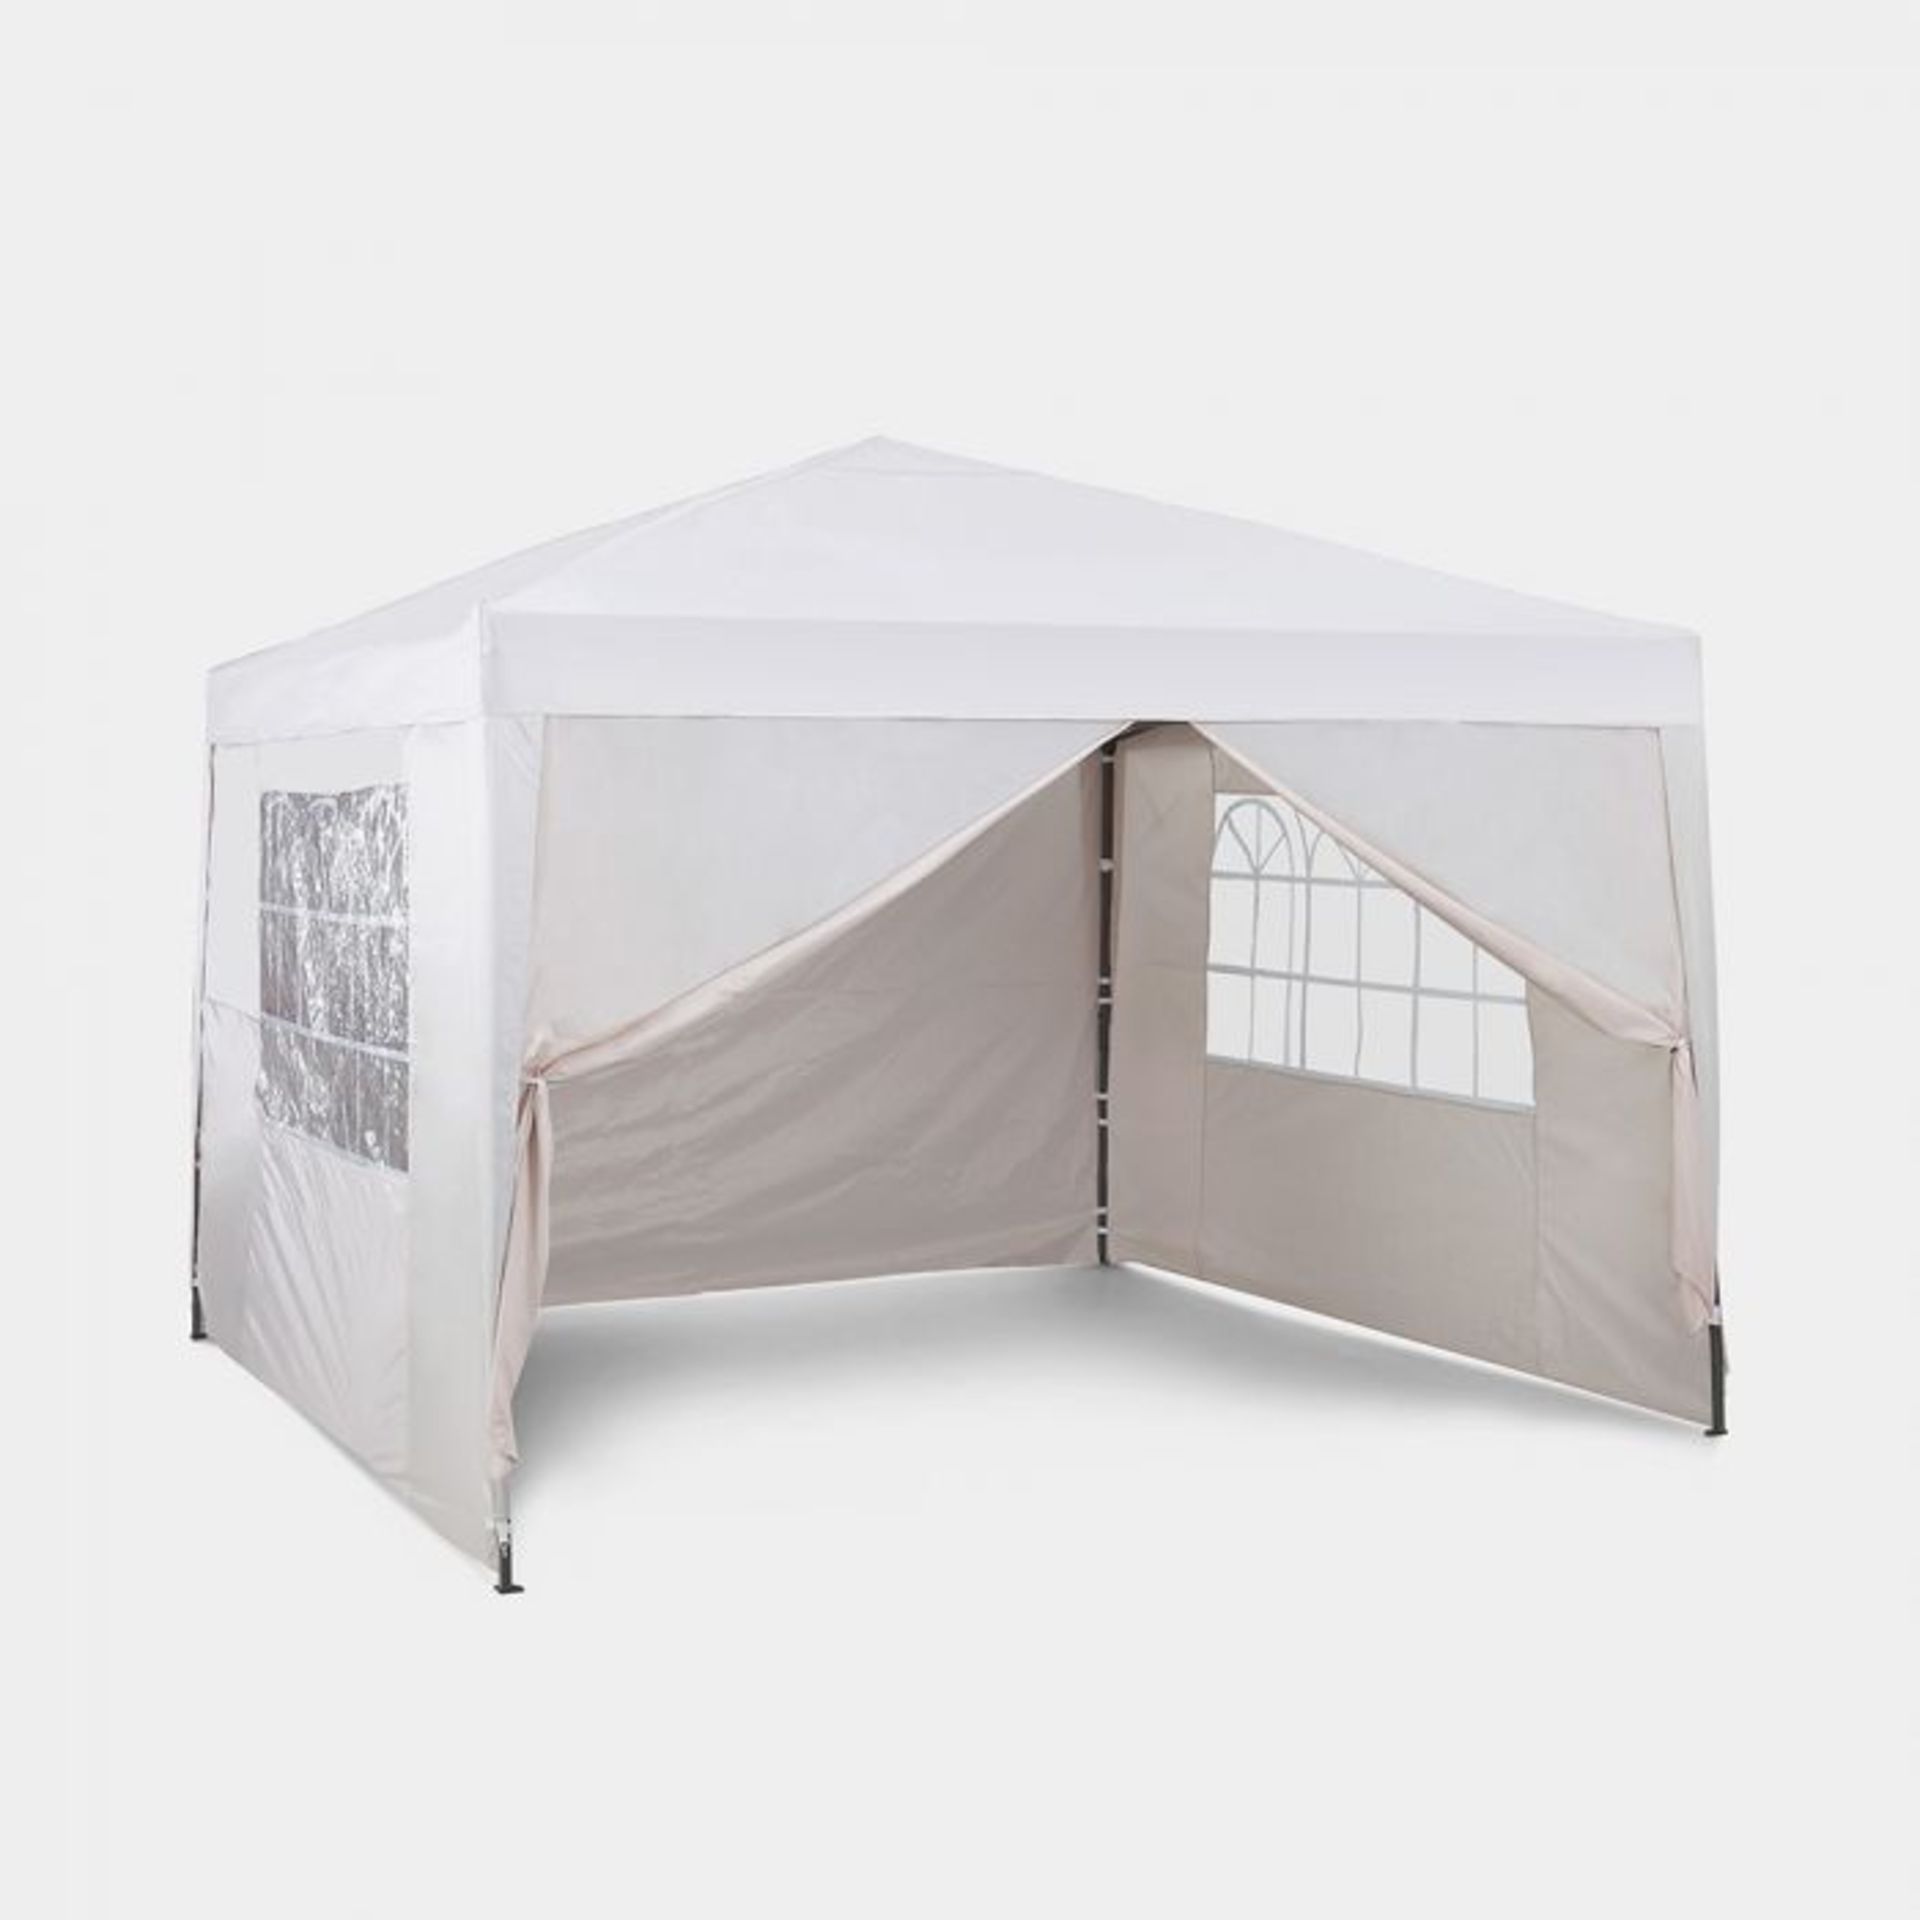 Ivory Pop-Up Gazebo Set 3 x 3m. Made from a sturdy steel frame with a 420D Oxford waterproof ivory